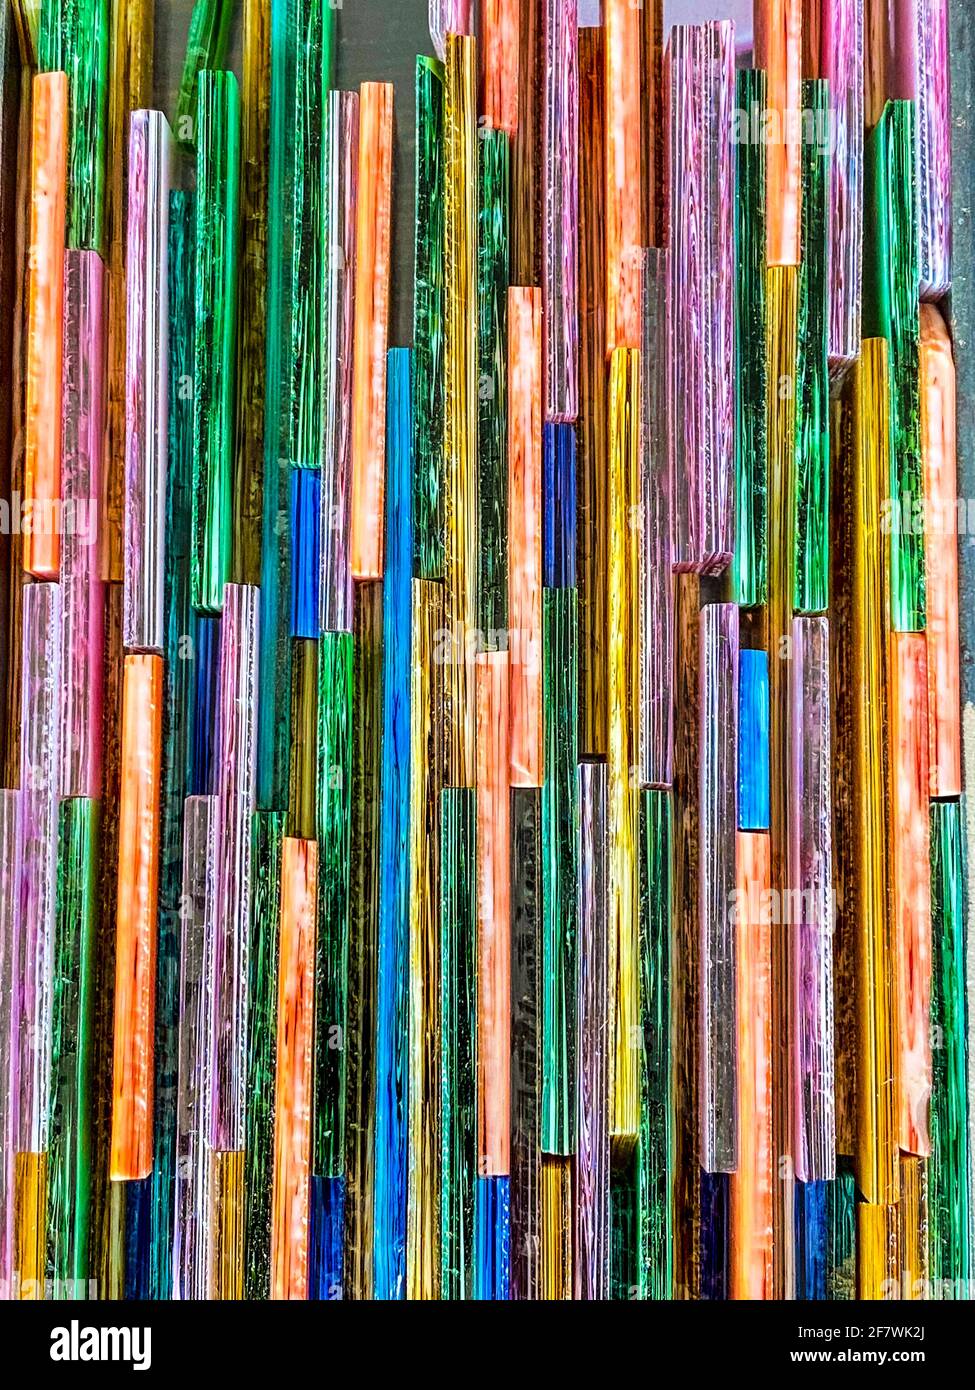 Colorful pieces of stained glass. Focus on foreground Stock Photo